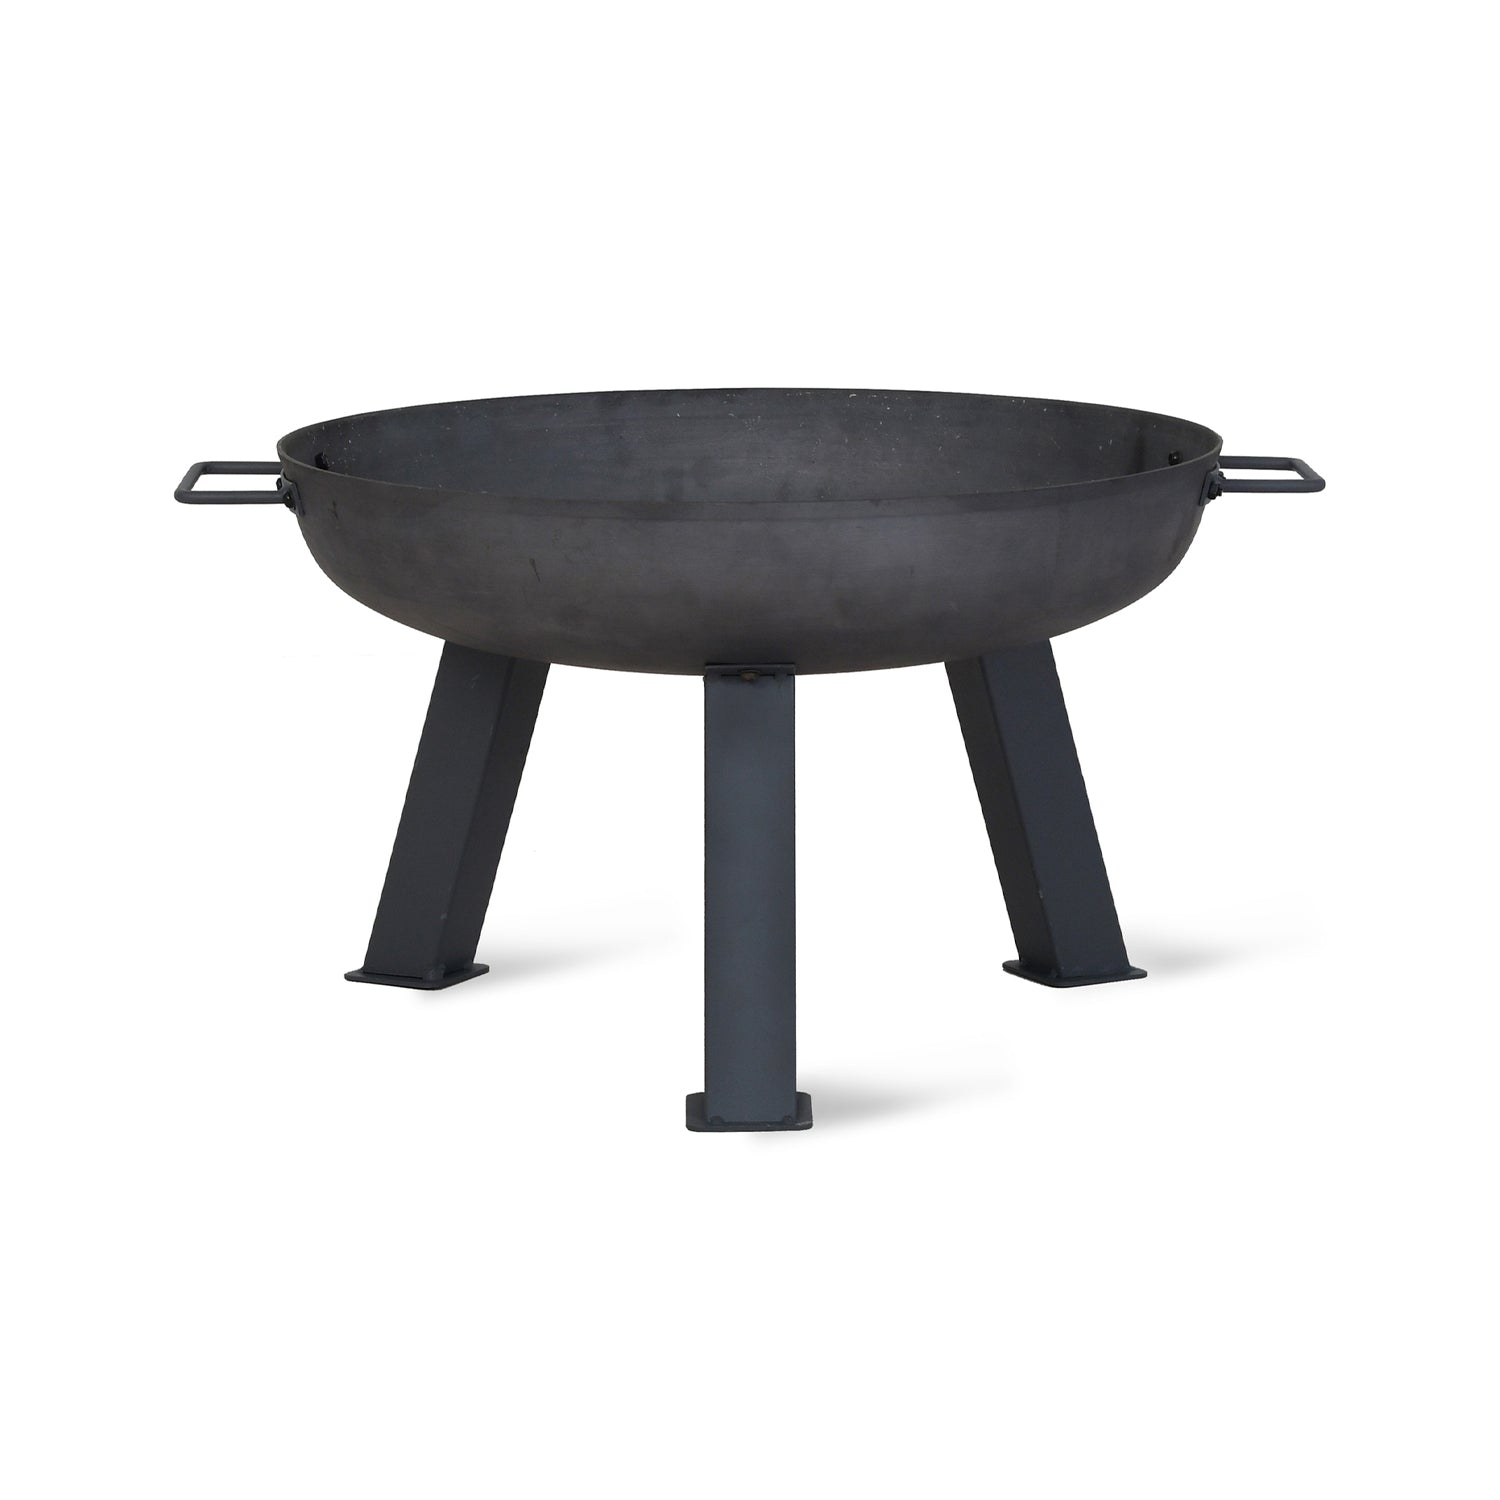 Foscot Fire Pit Small Cast Iron by Garden Trading